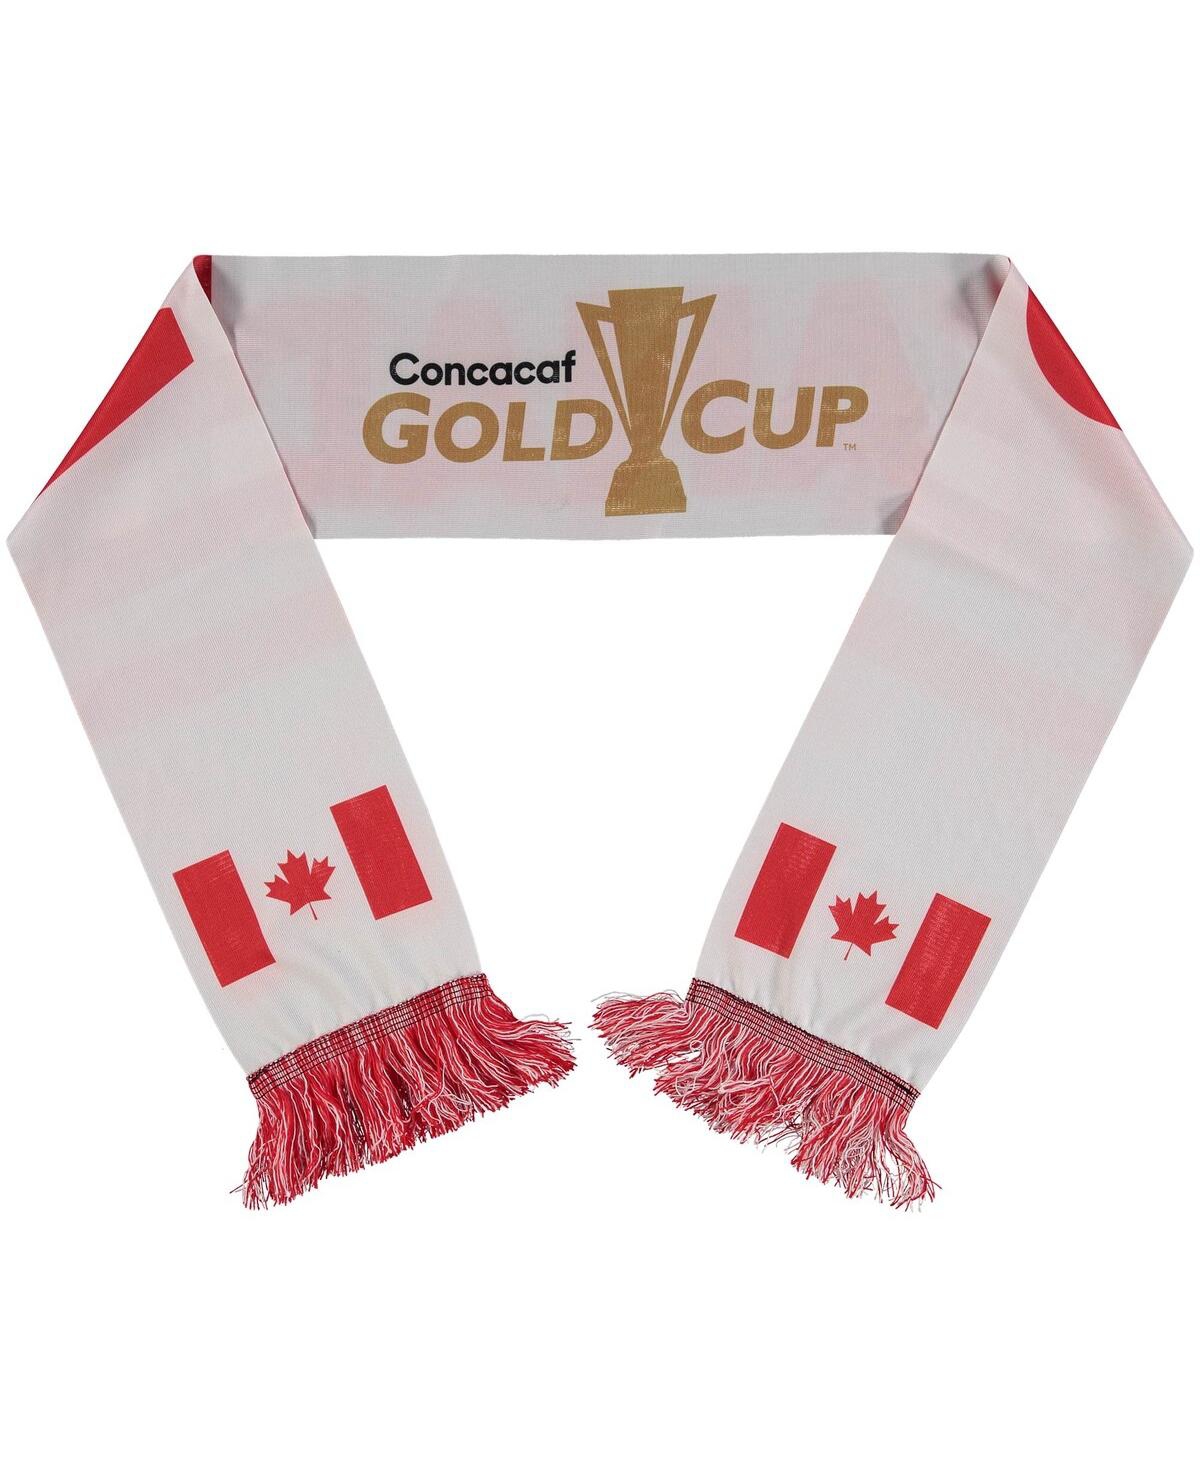 Ruffneck Scarves Women's Canada Soccer Concacaf Gold Cup Scarf In White